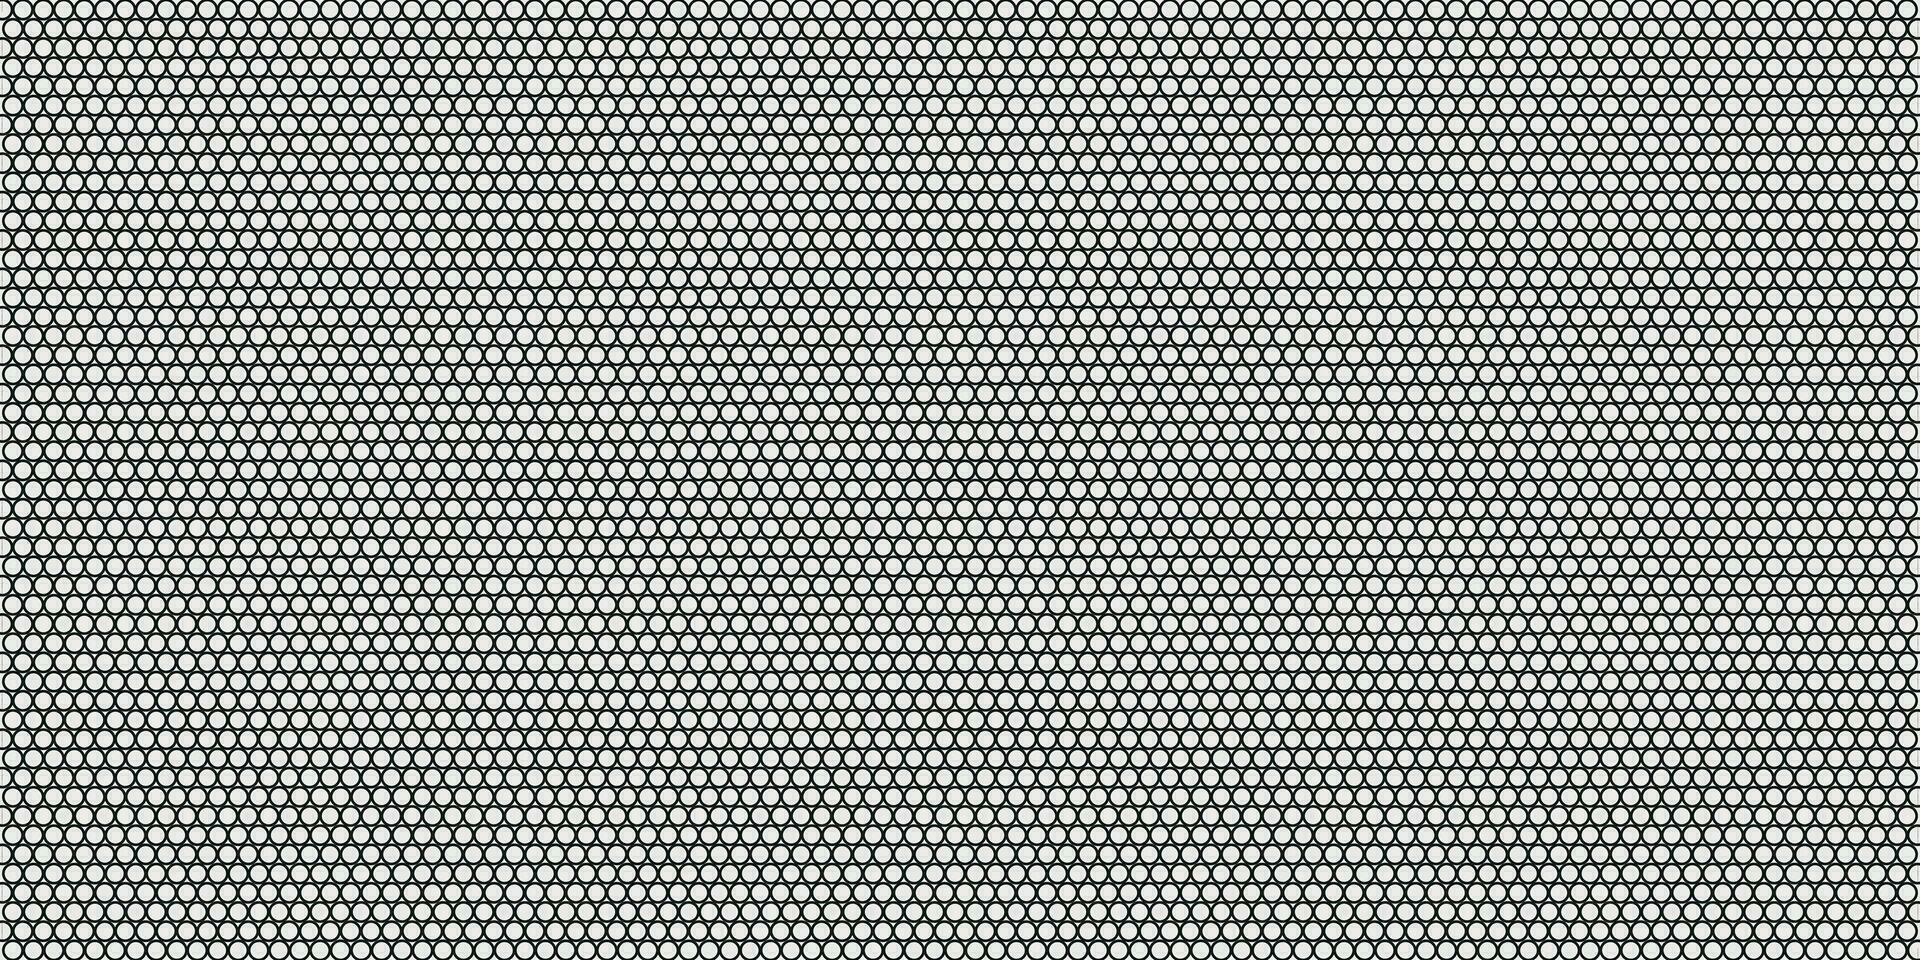 Vector mesh seamless pattern background texture.